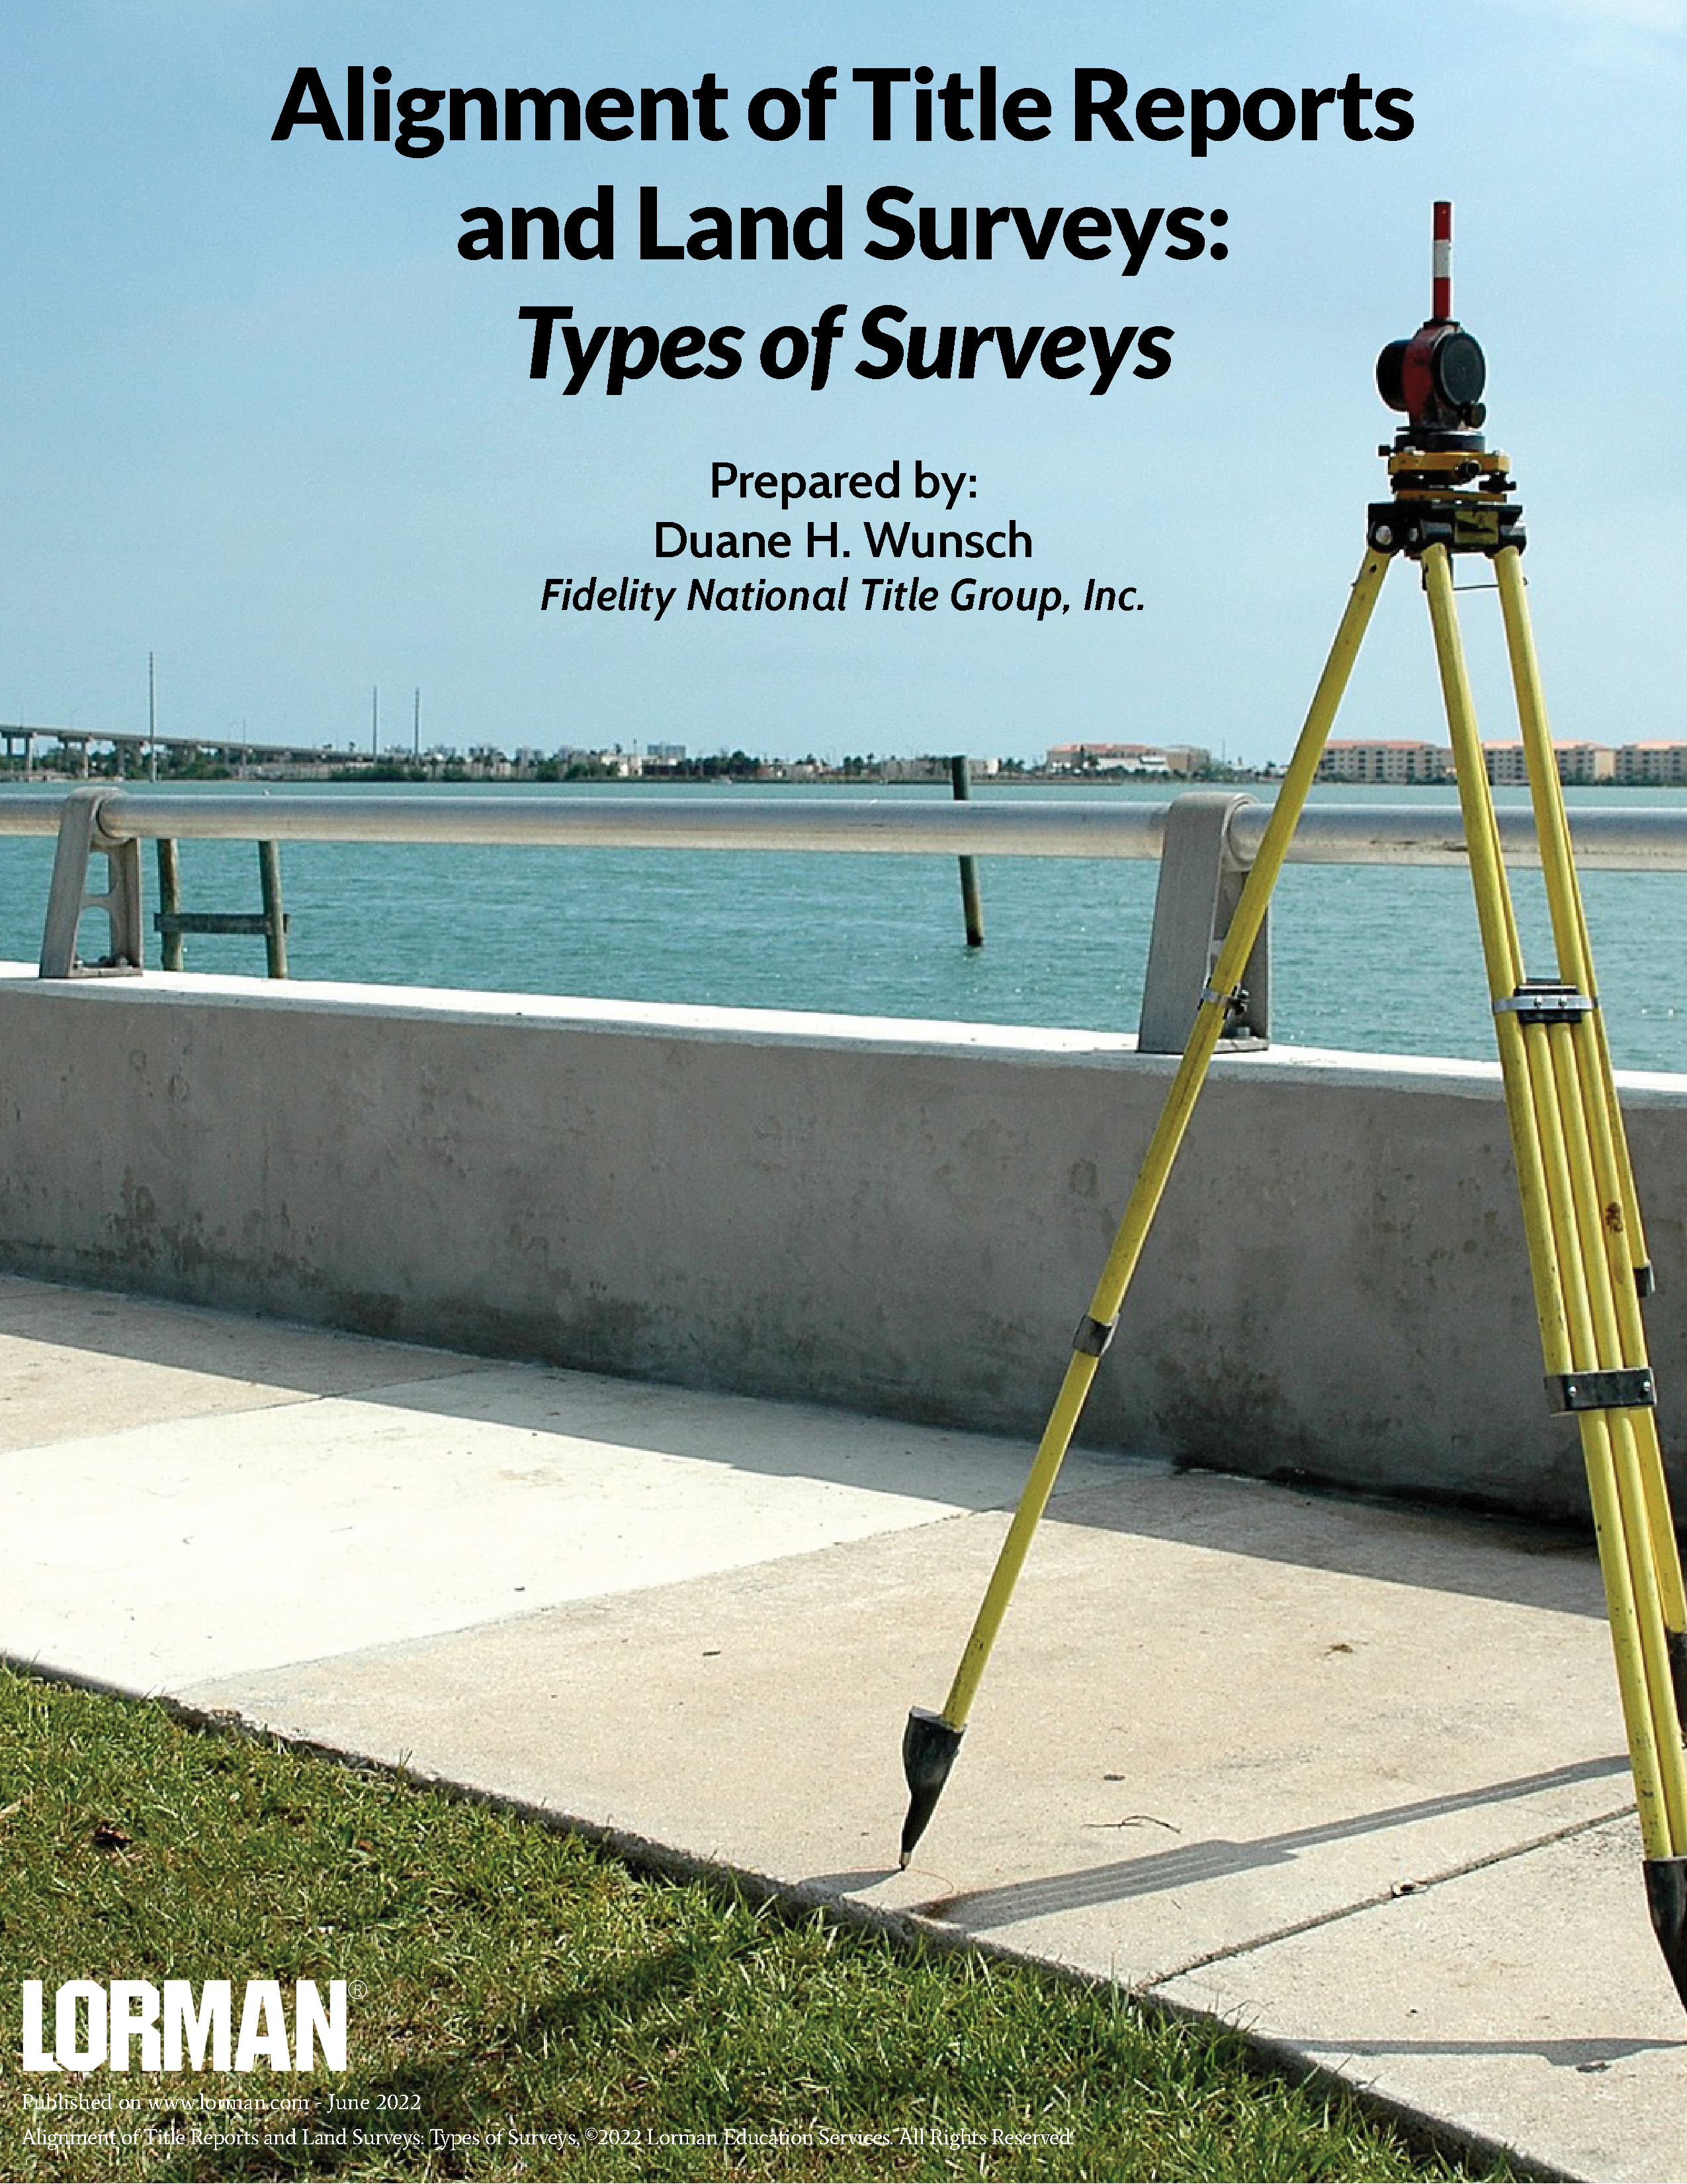 Alignment of Title Reports and Land Surveys: Types of Surveys